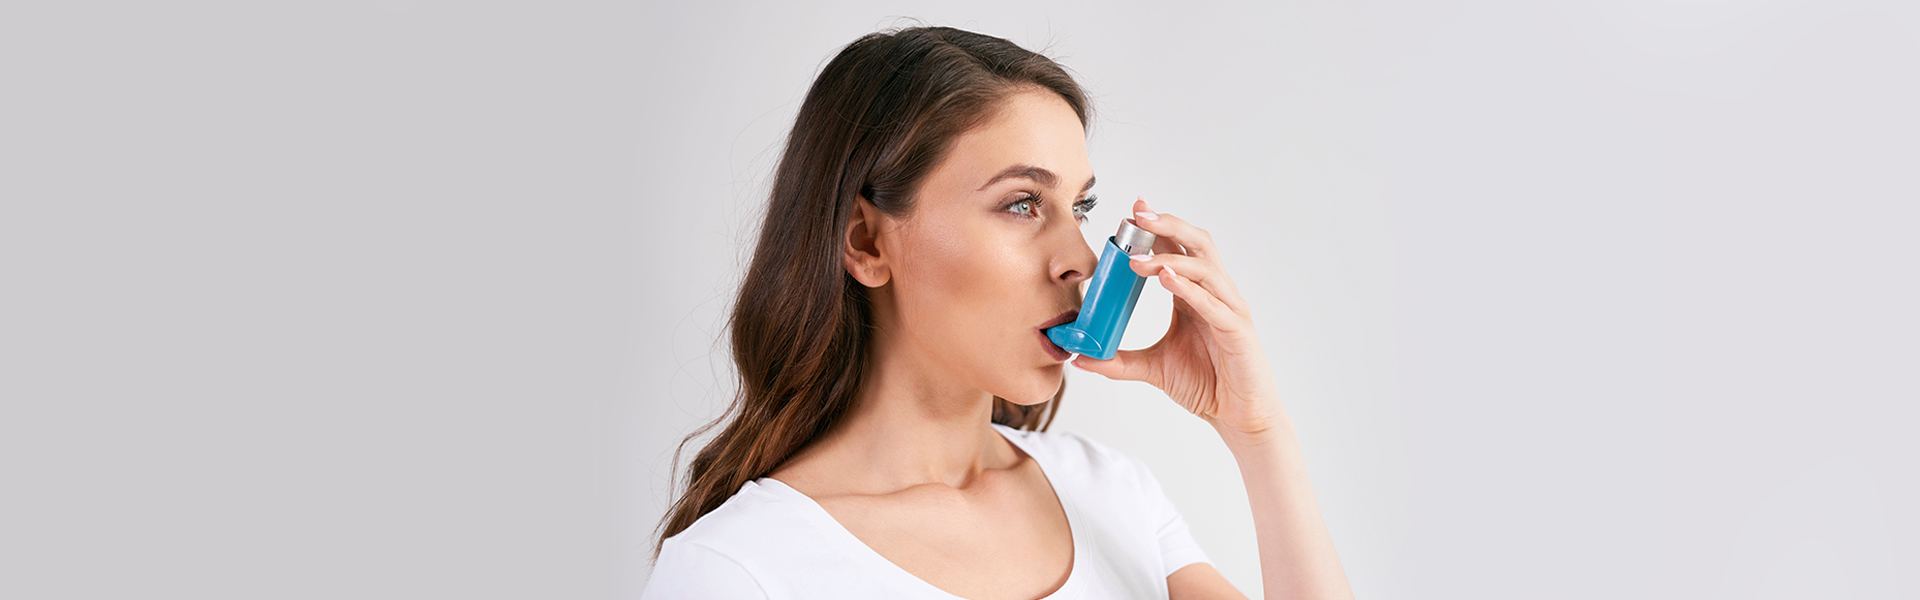 Asthma Definition, Triggers, and First-Aid Treatment